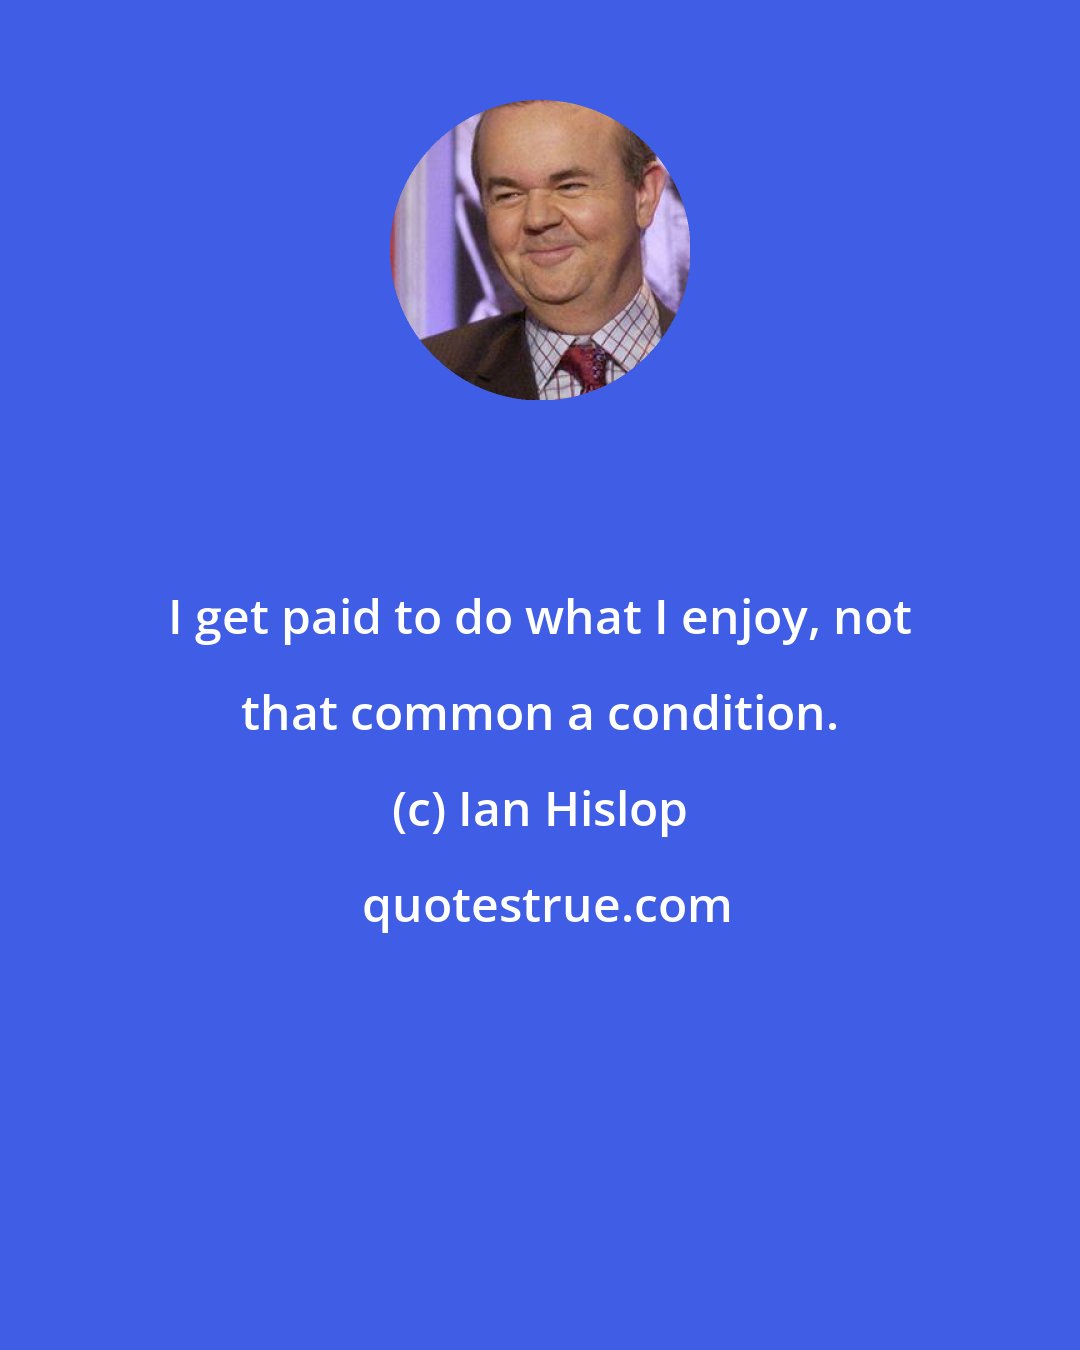 Ian Hislop: I get paid to do what I enjoy, not that common a condition.